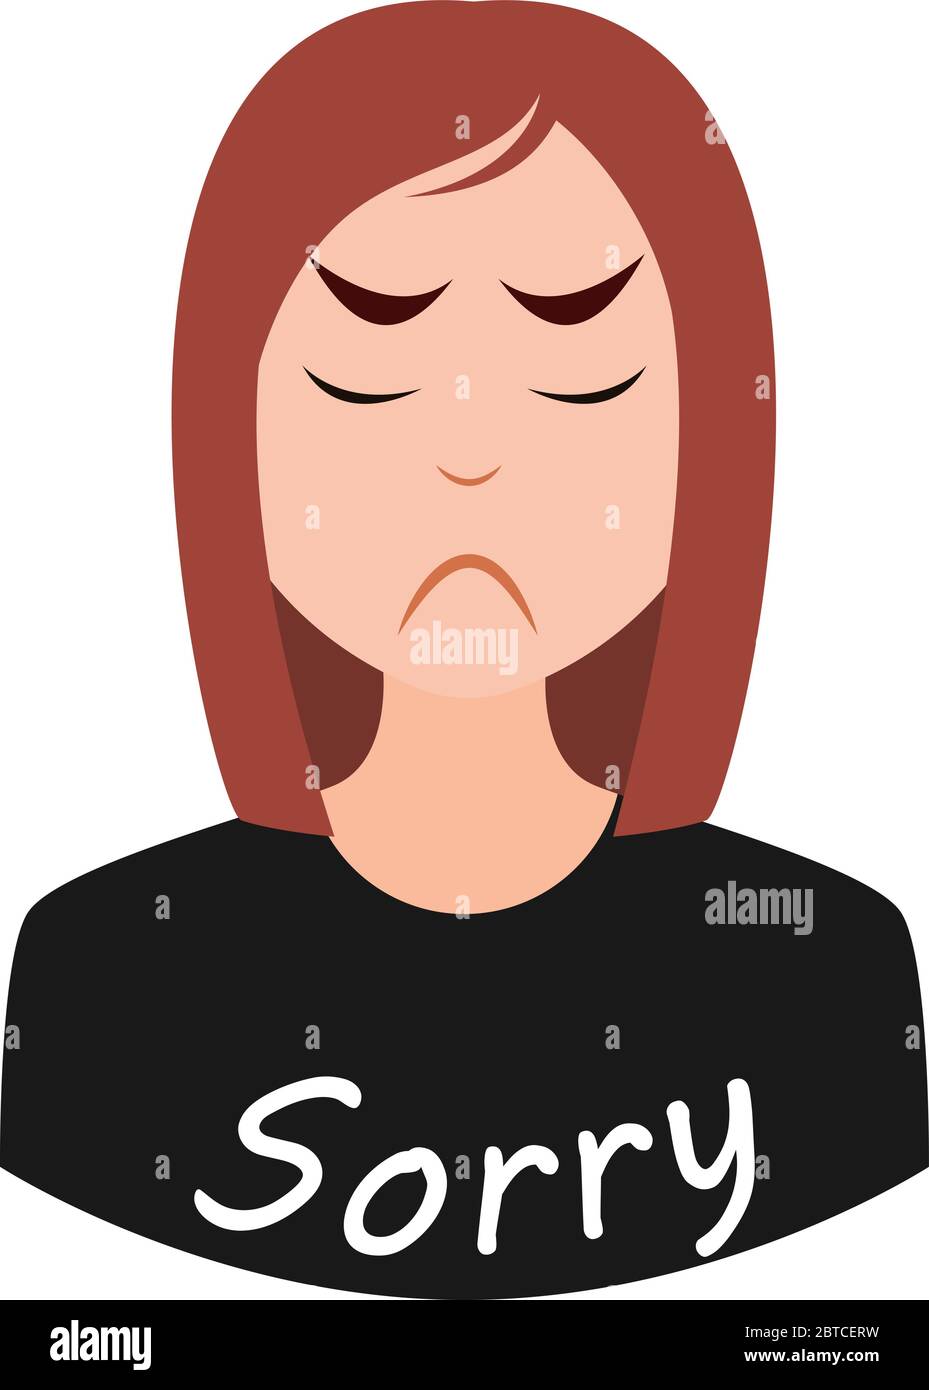 Feeling sorry Cut Out Stock Images & Pictures - Alamy